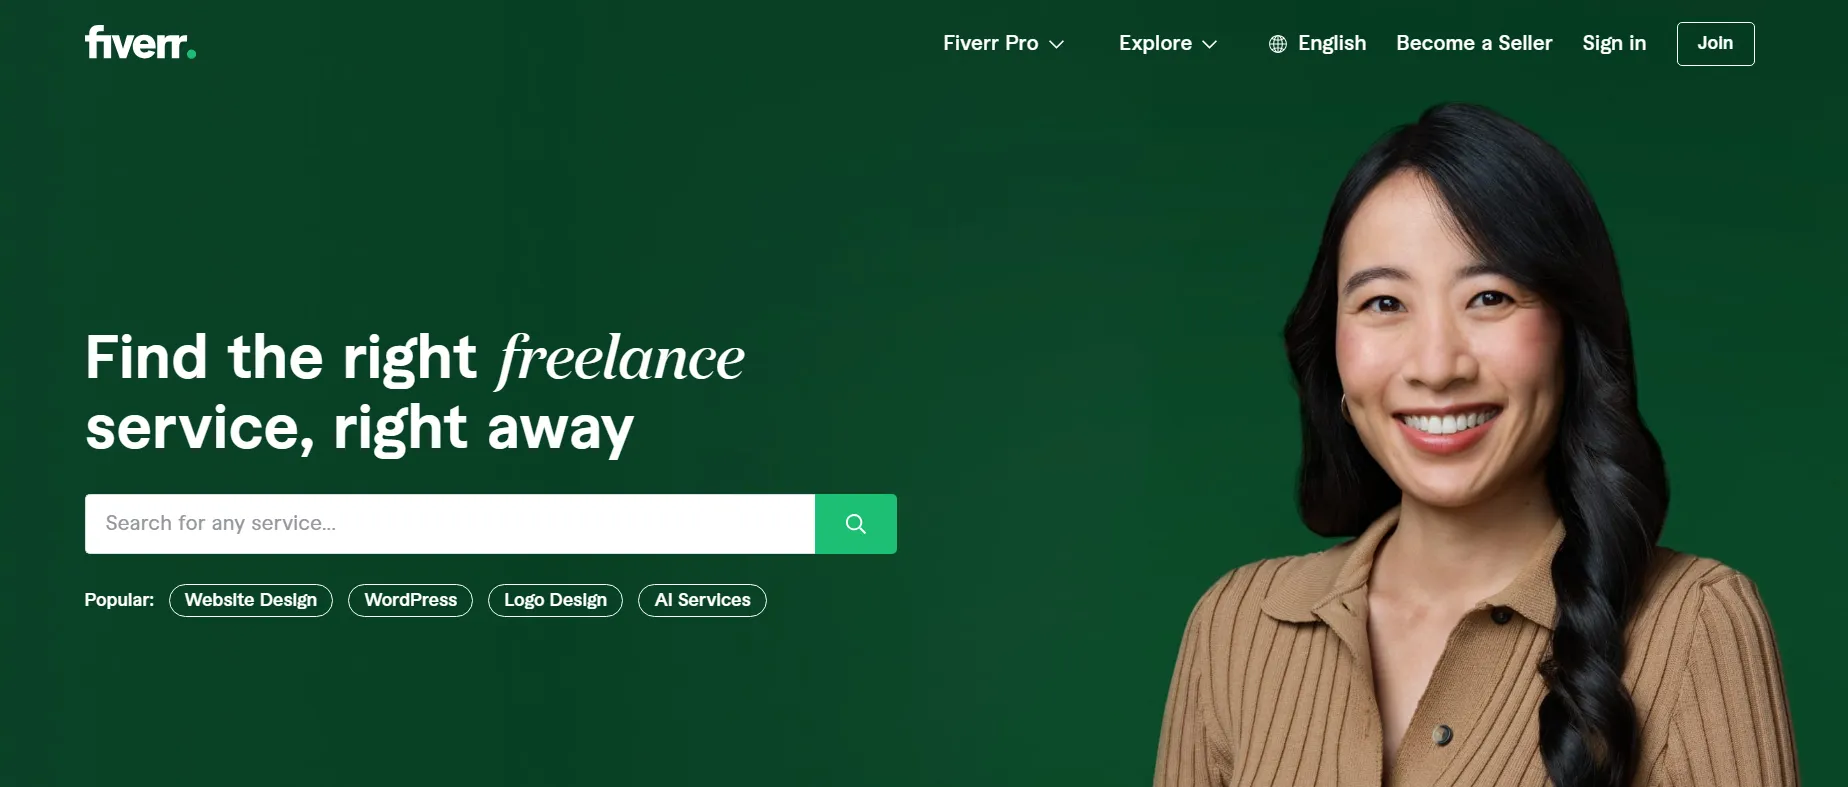 Fiverr Overview